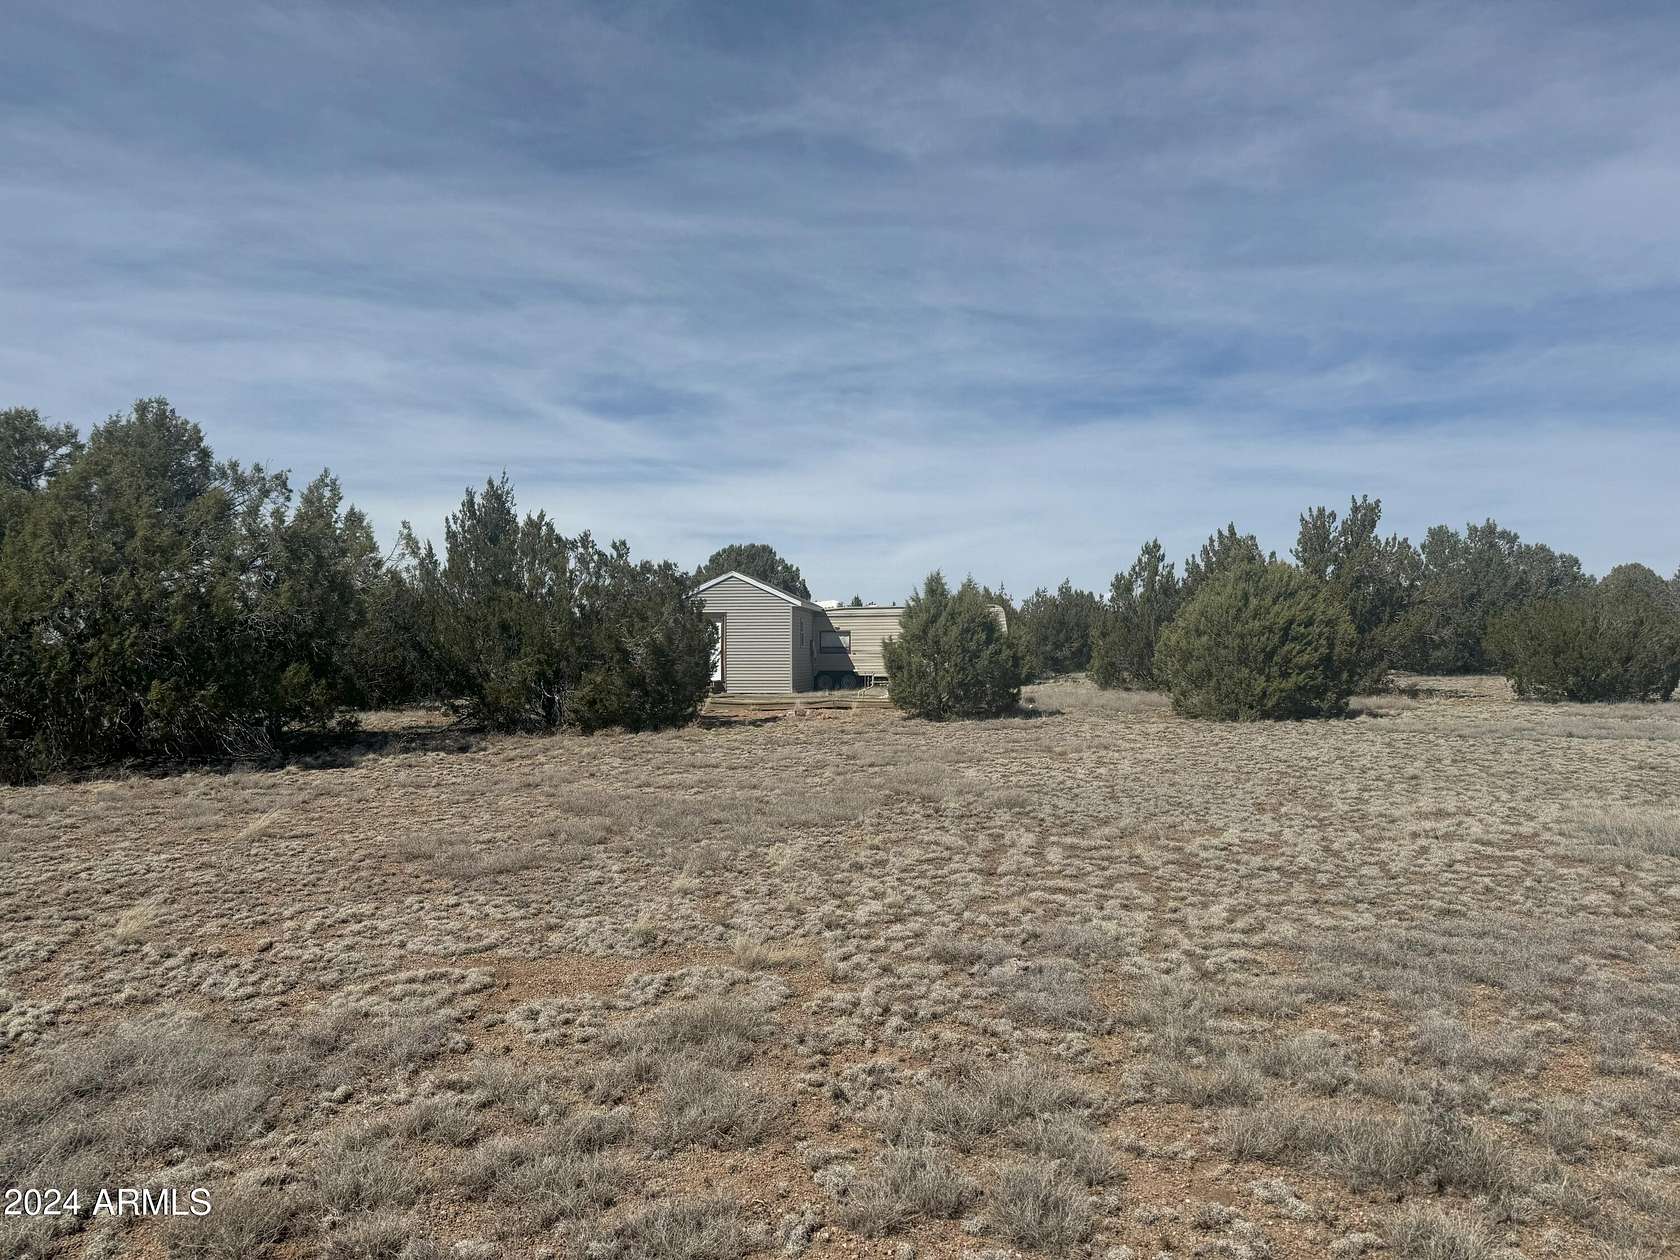 40.1 Acres of Recreational Land for Sale in Seligman, Arizona